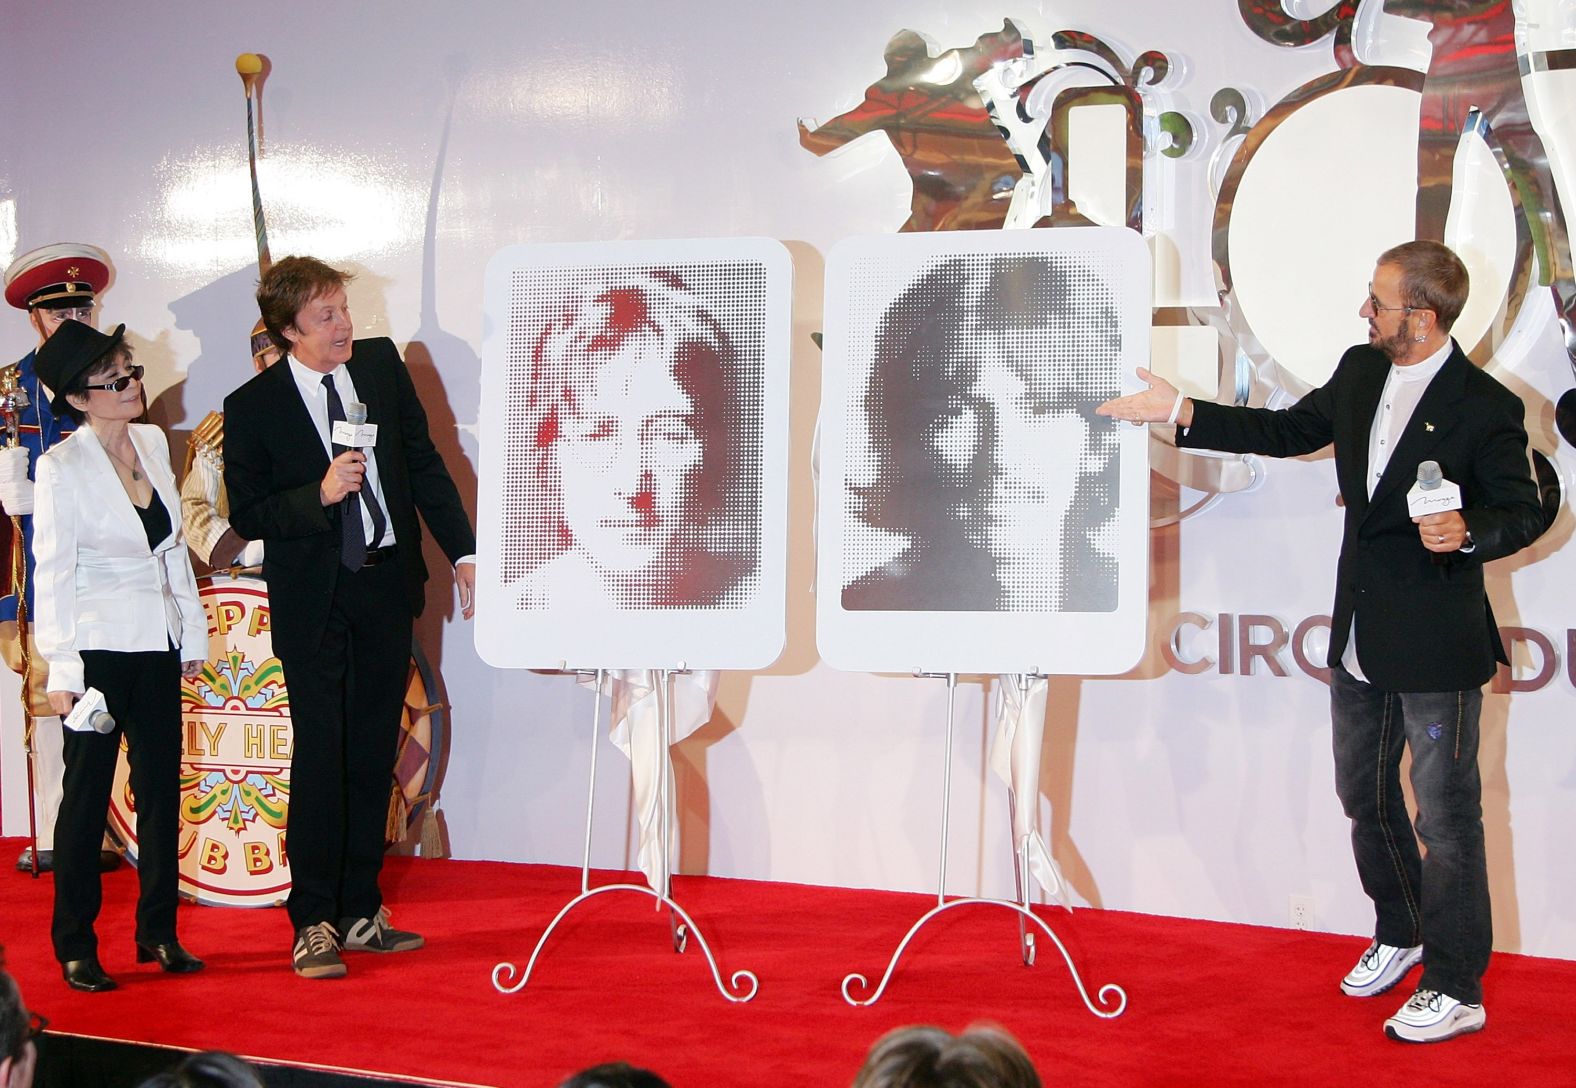 Starr and McCartney are joined by Lennon's widow, Yoko Ono, as they unveil plaques of Lennon and Harrison in Las Vegas in 2007. It was the first anniversary of "Love," Cirque du Soleil's Beatles-themed show at the Mirage Hotel & Casino.